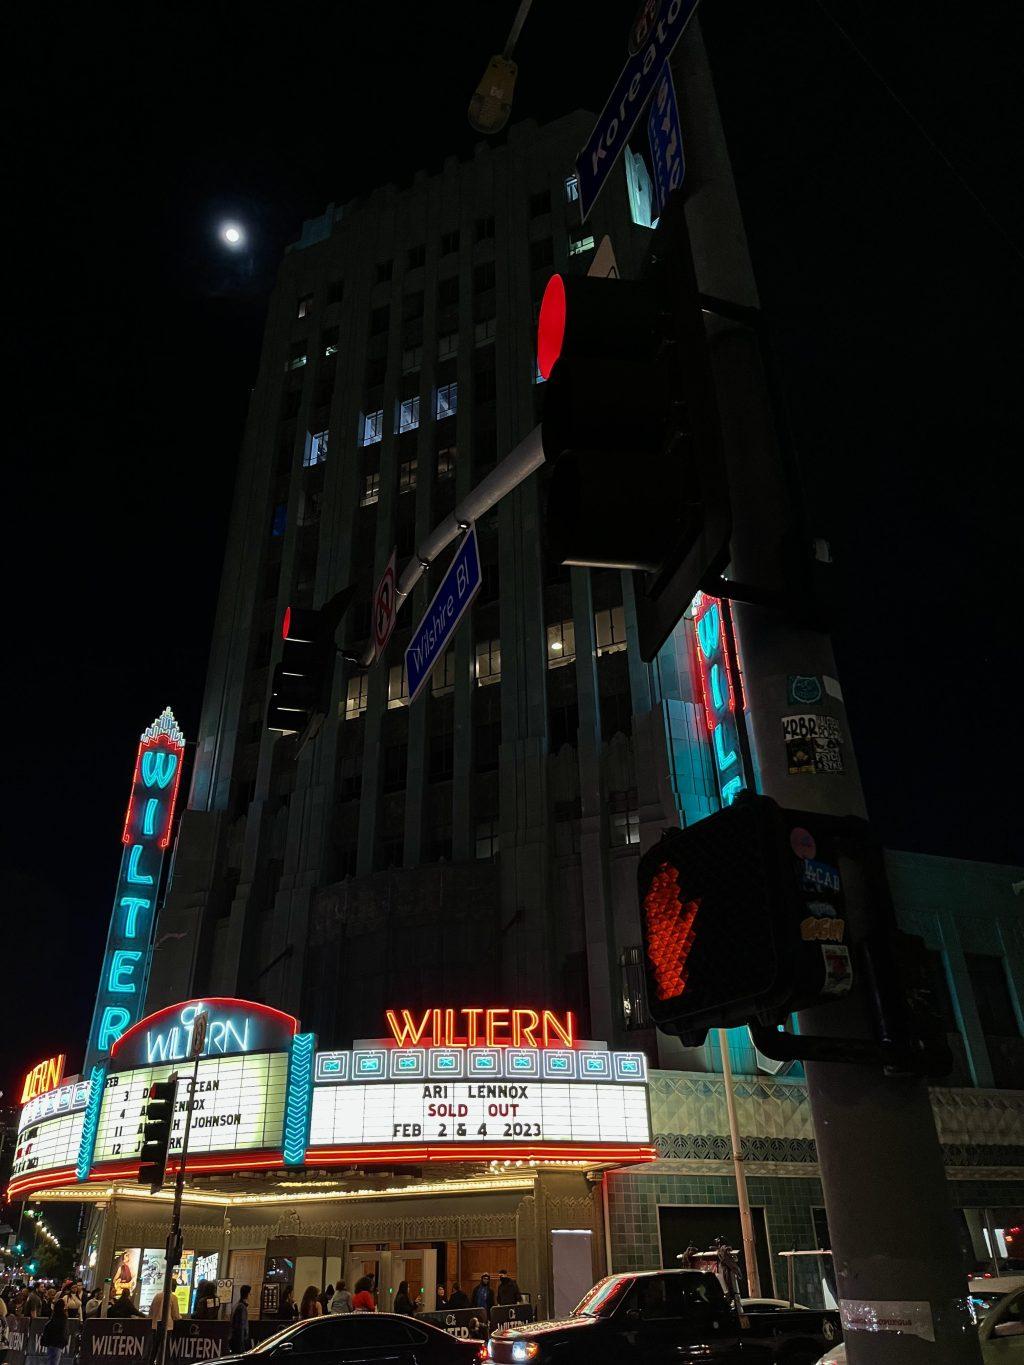 The front of The Wiltern theater where Ari Lennox performed Feb. 2. Lennox’s impressive rise to fame began from releasing songs on SoundCloud to selling out L.A. venues. Photo by Ivan Manriquez